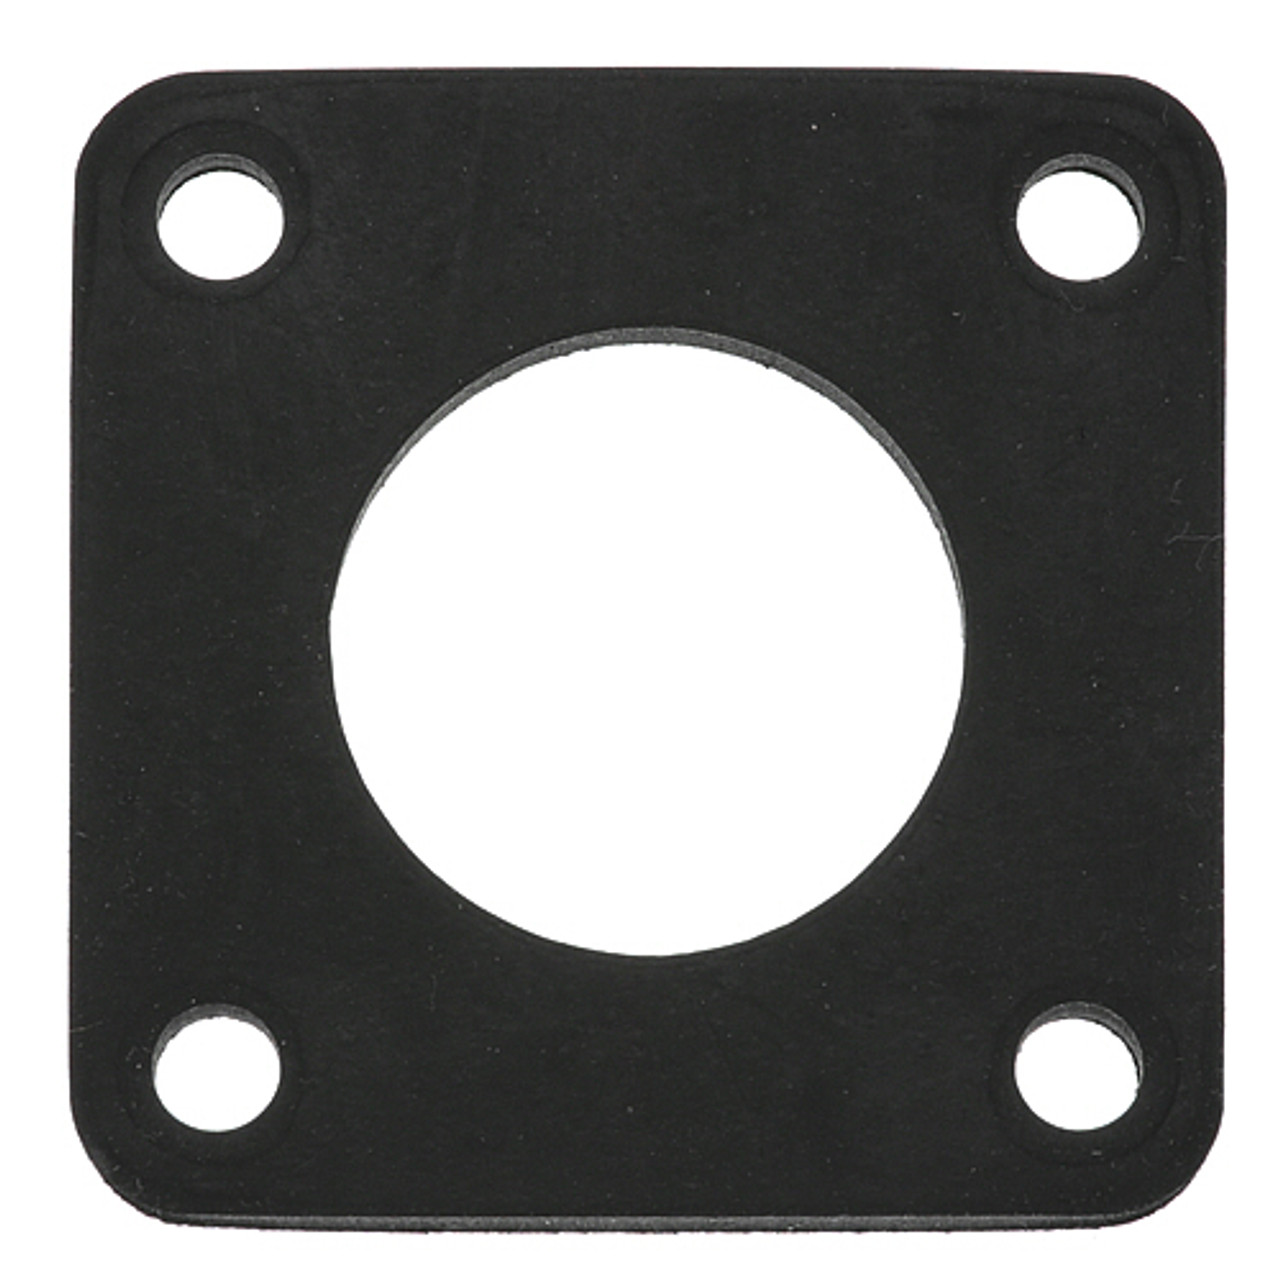 Gasket 2.5" X 2.5" - Replacement Part For Garland 078155-1